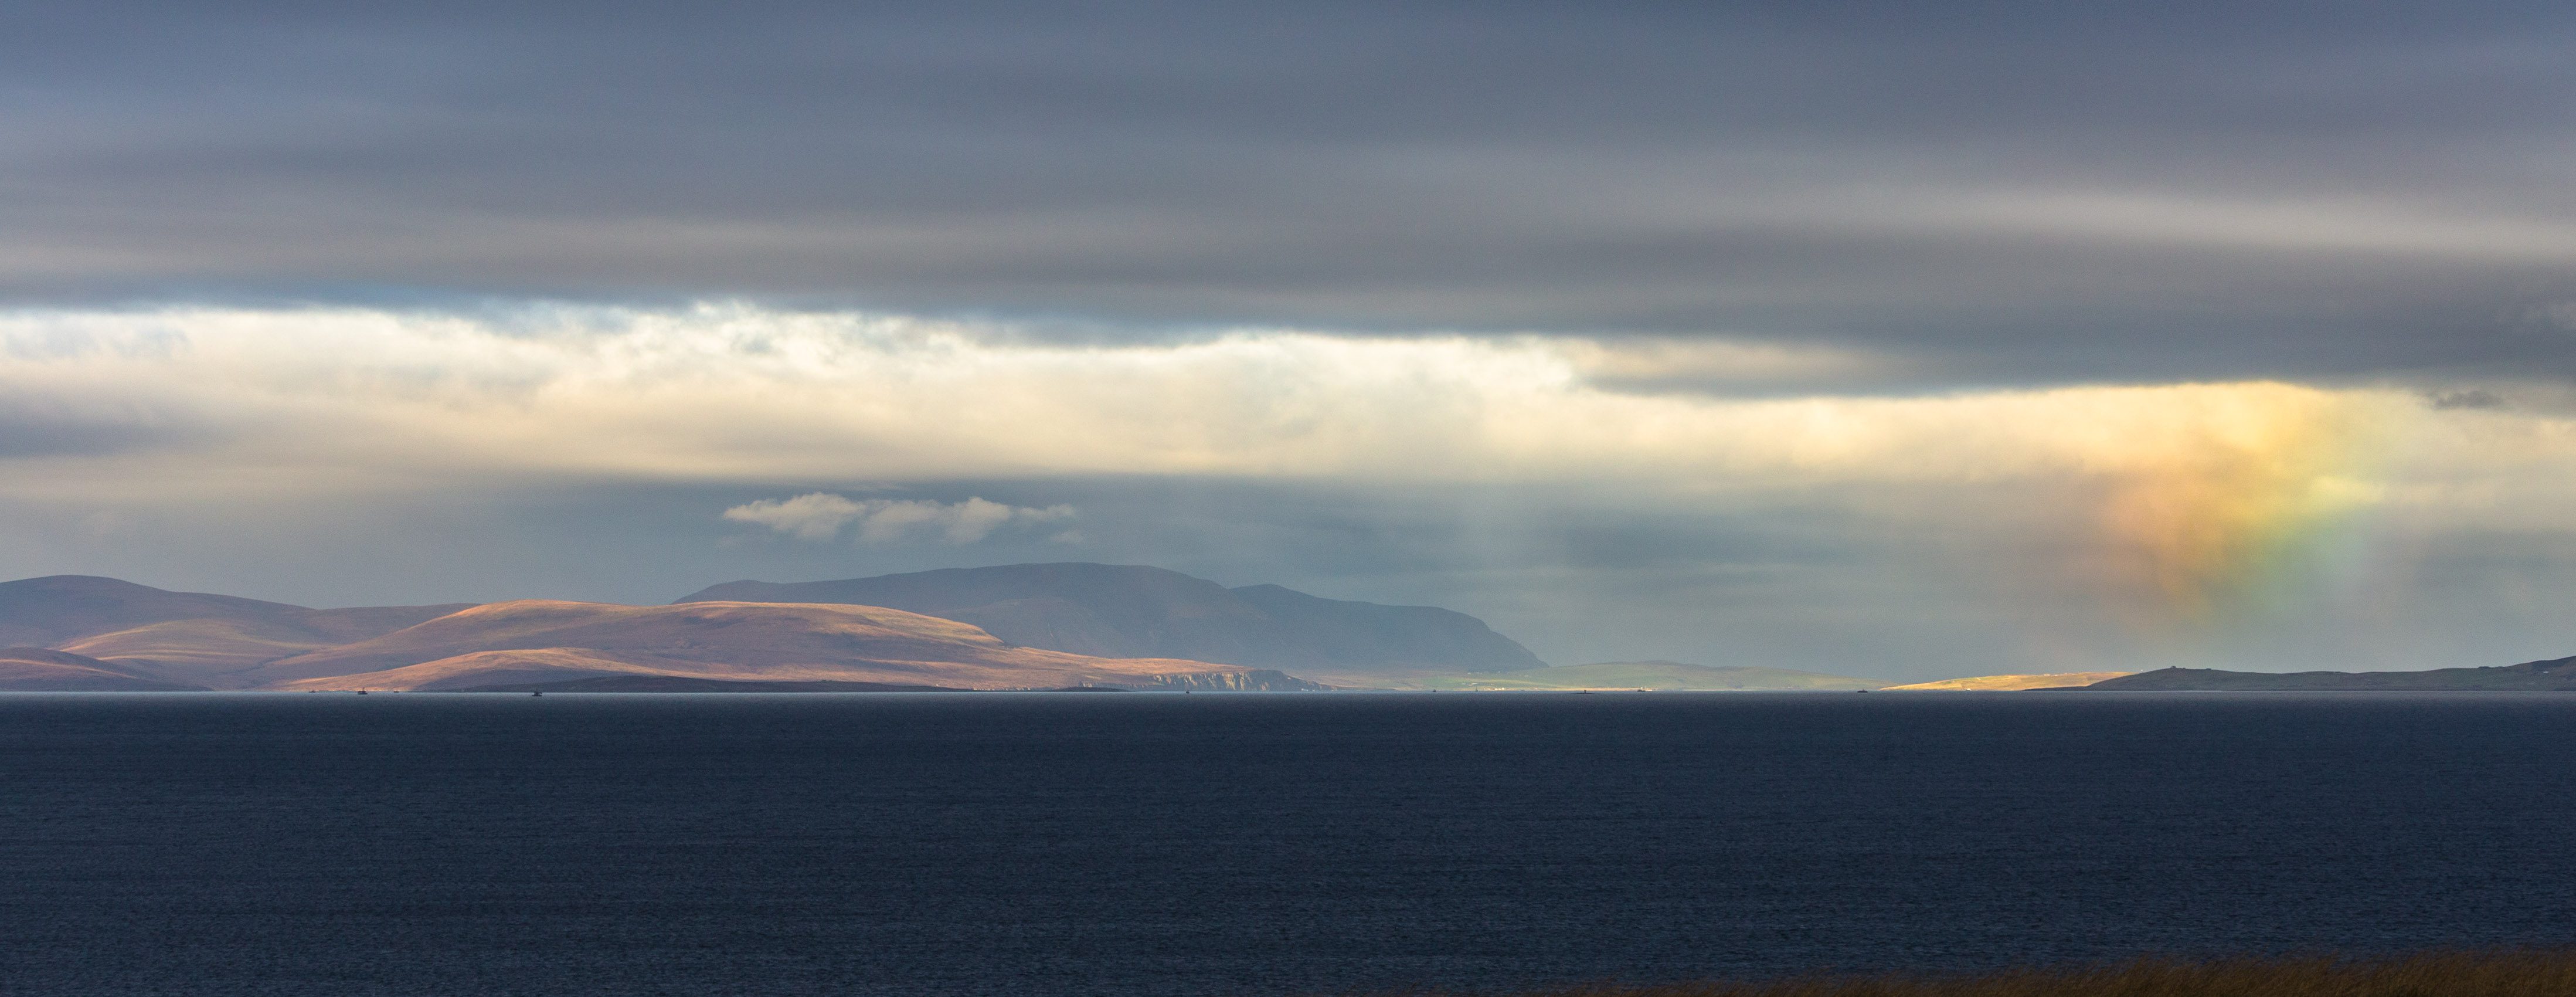 Dramatic weather over Scapa Flow and the island of Hoy, Orkney Islands. OR030